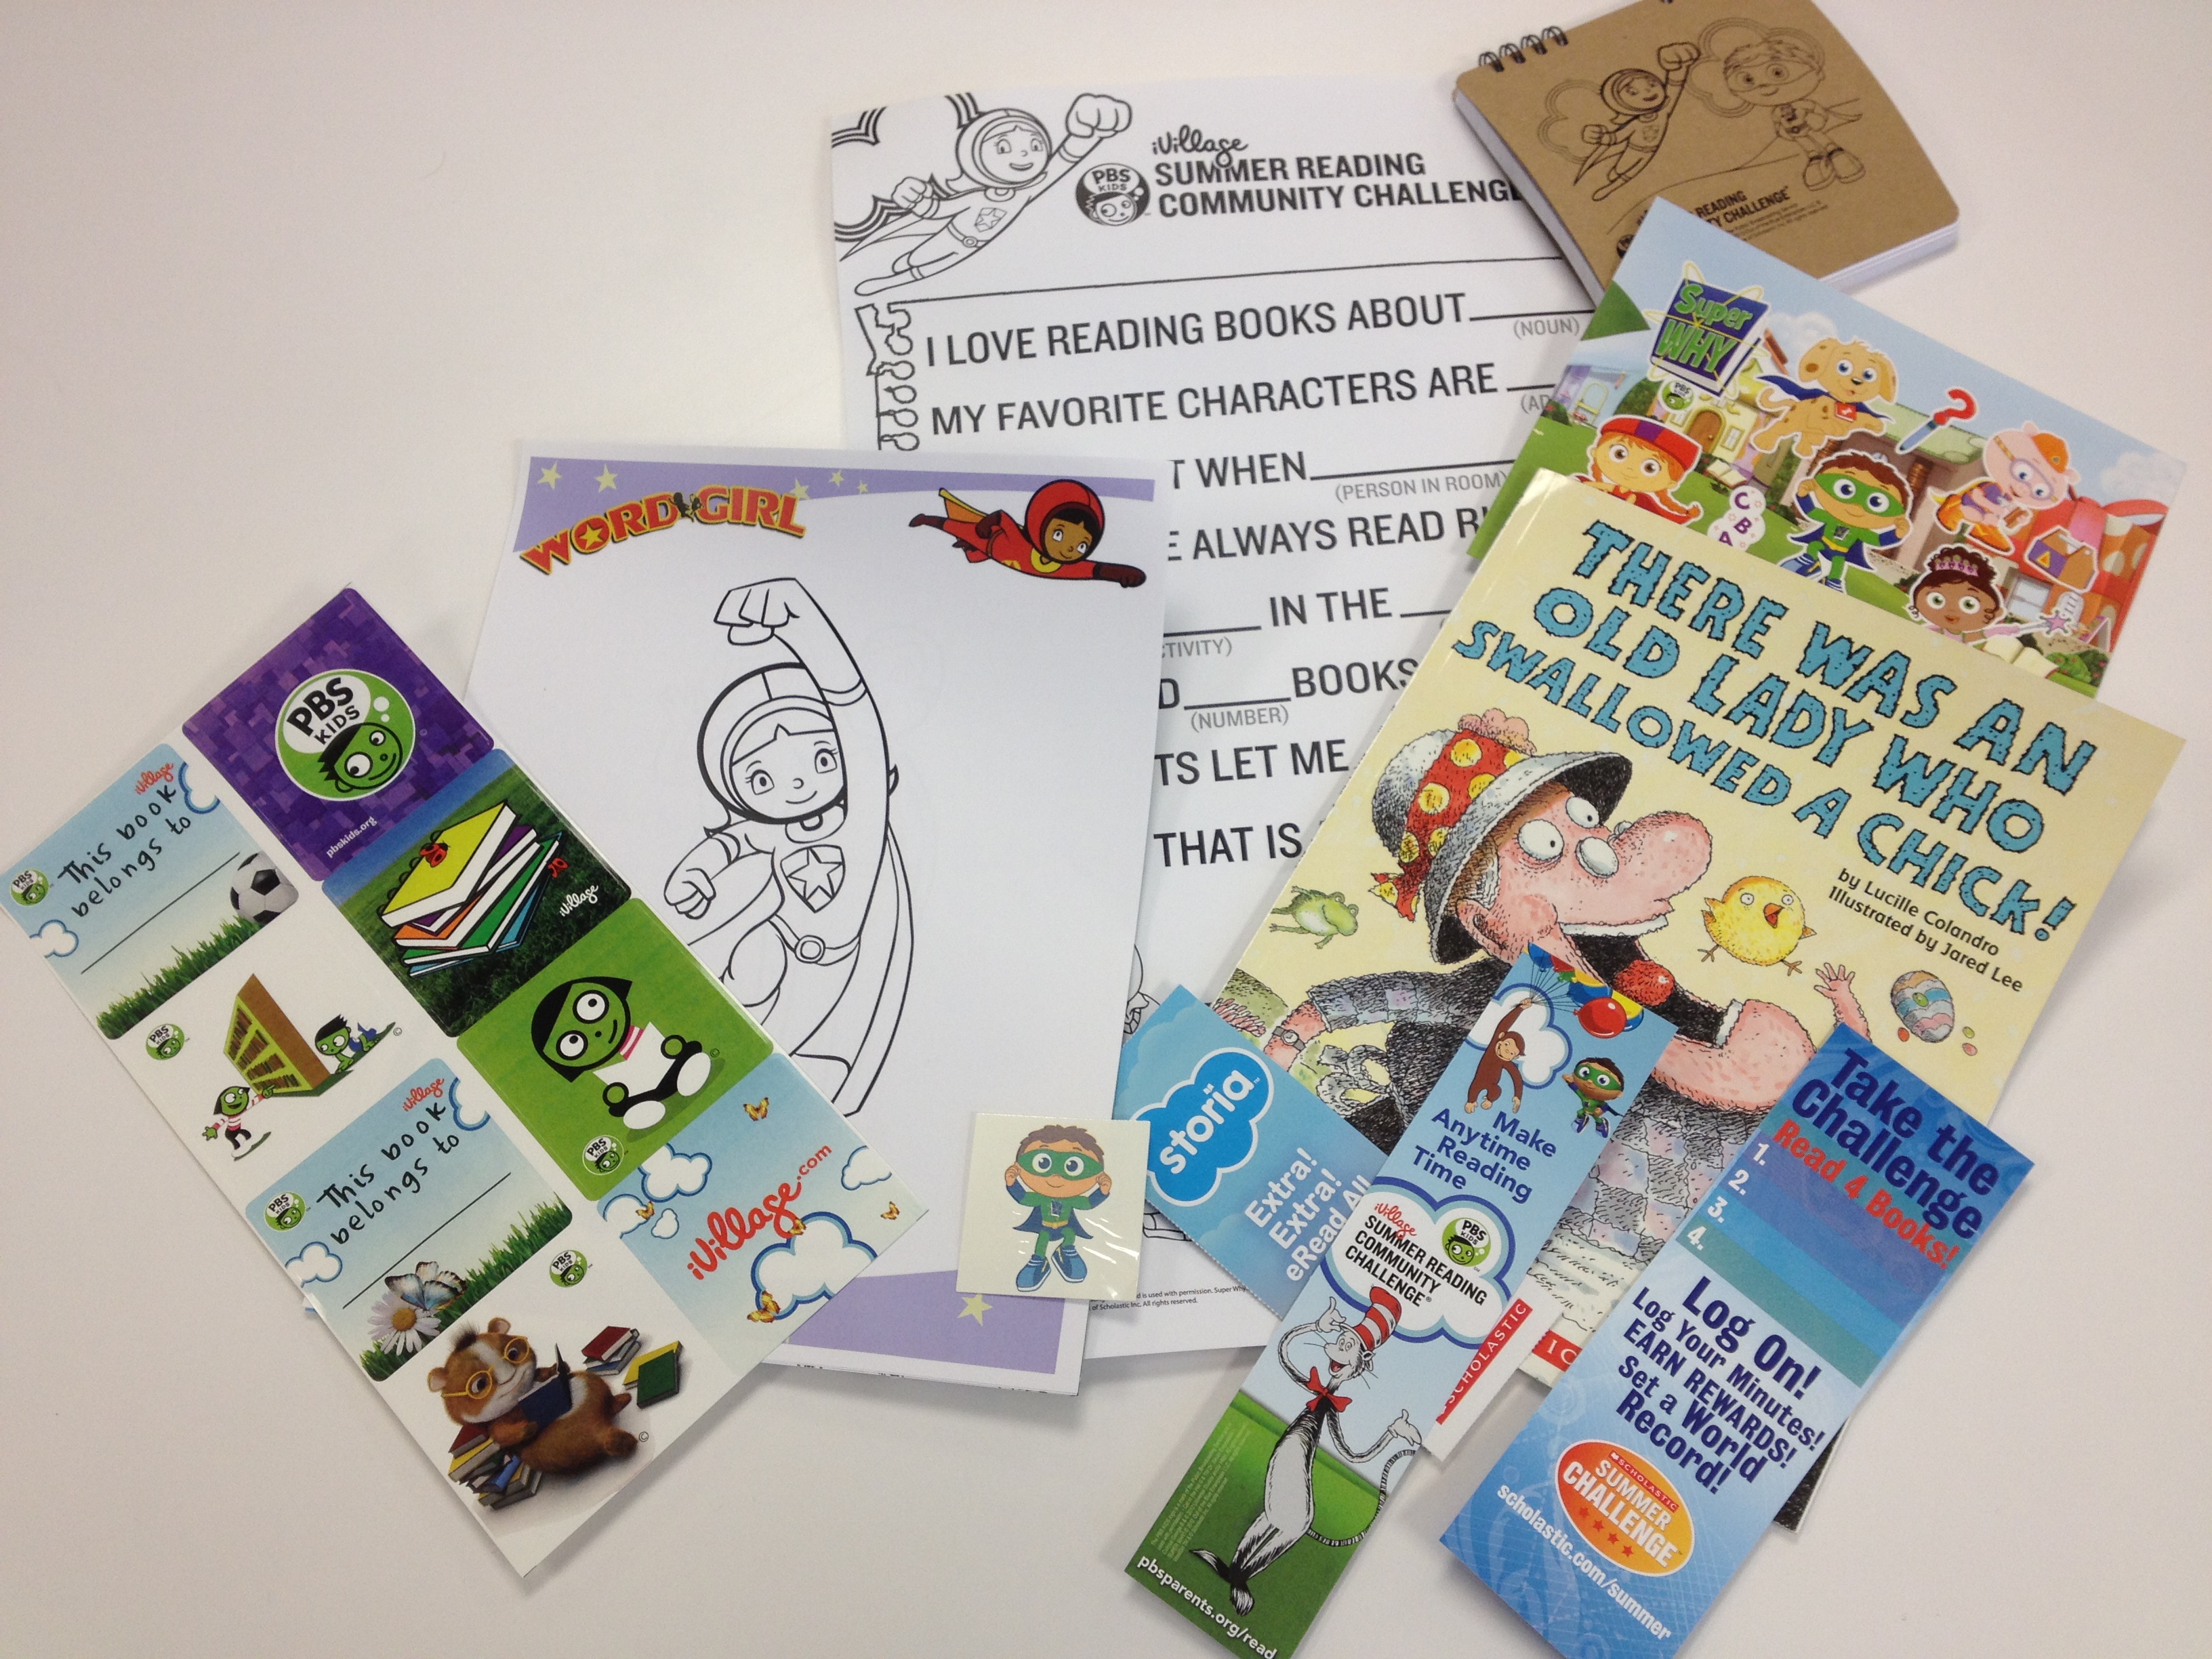 The iVillage PBS KIDS Summer Reading Community Challenge is Back for the Third Year